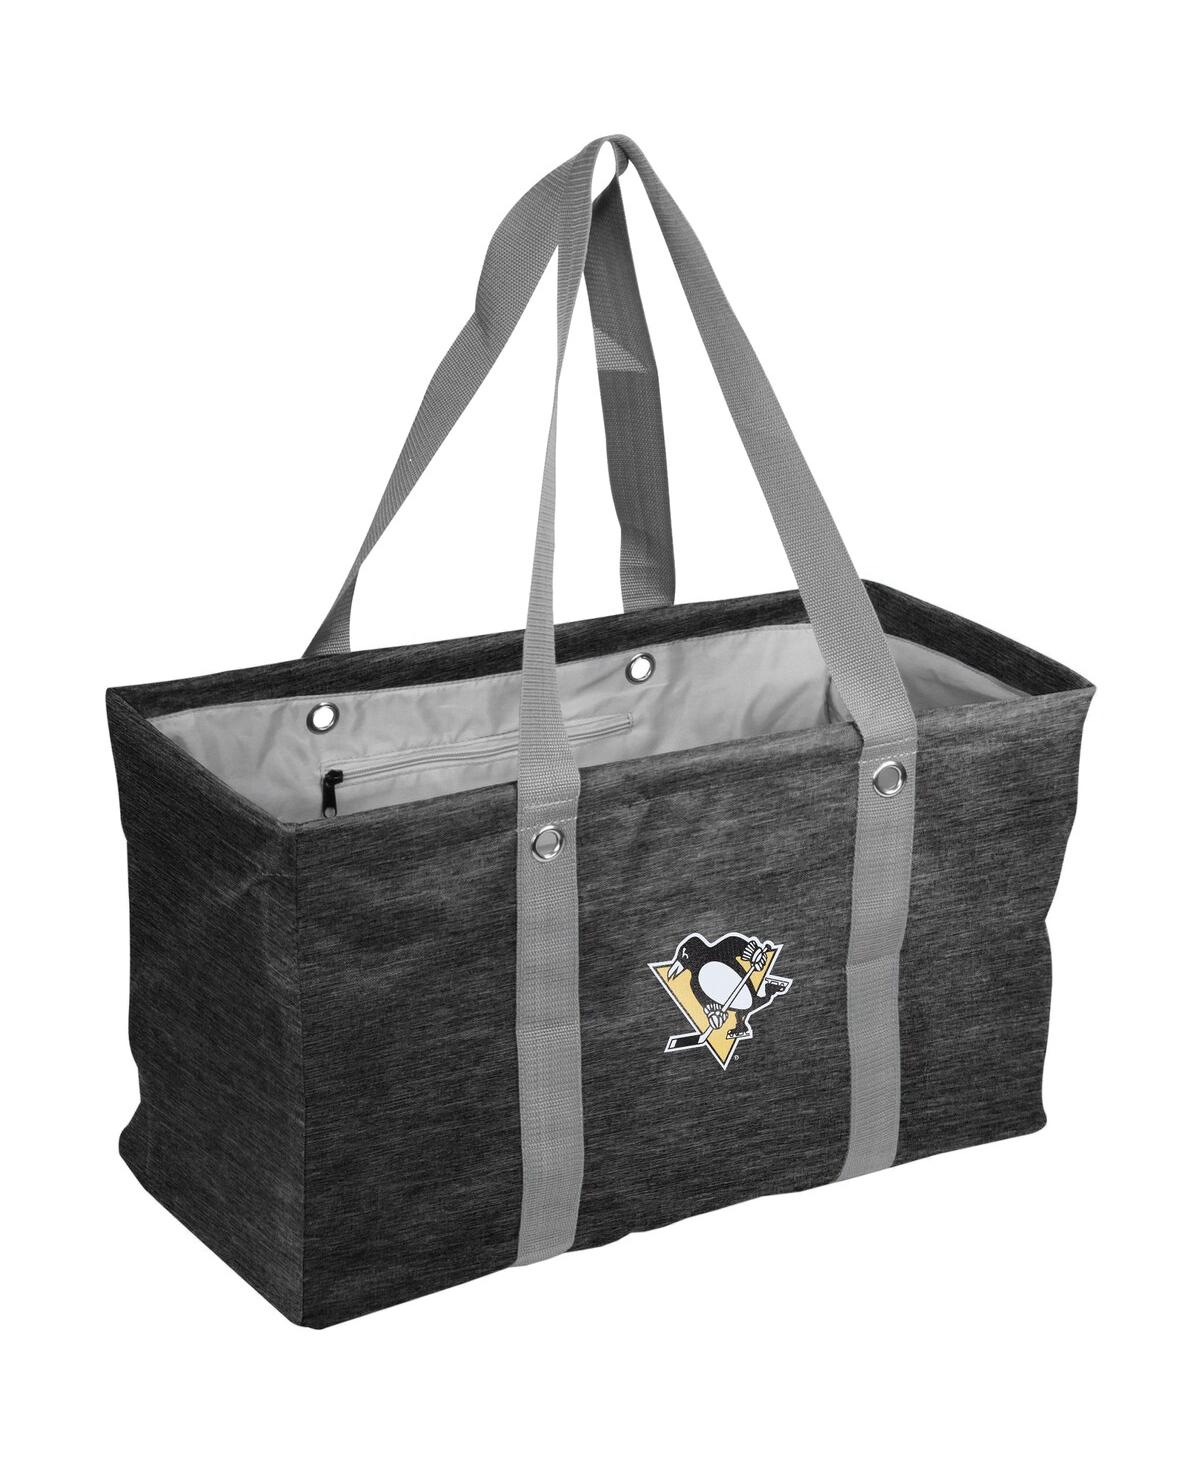 Men's and Women's Pittsburgh Penguins Crosshatch Picnic Caddy Tote Bag - Black